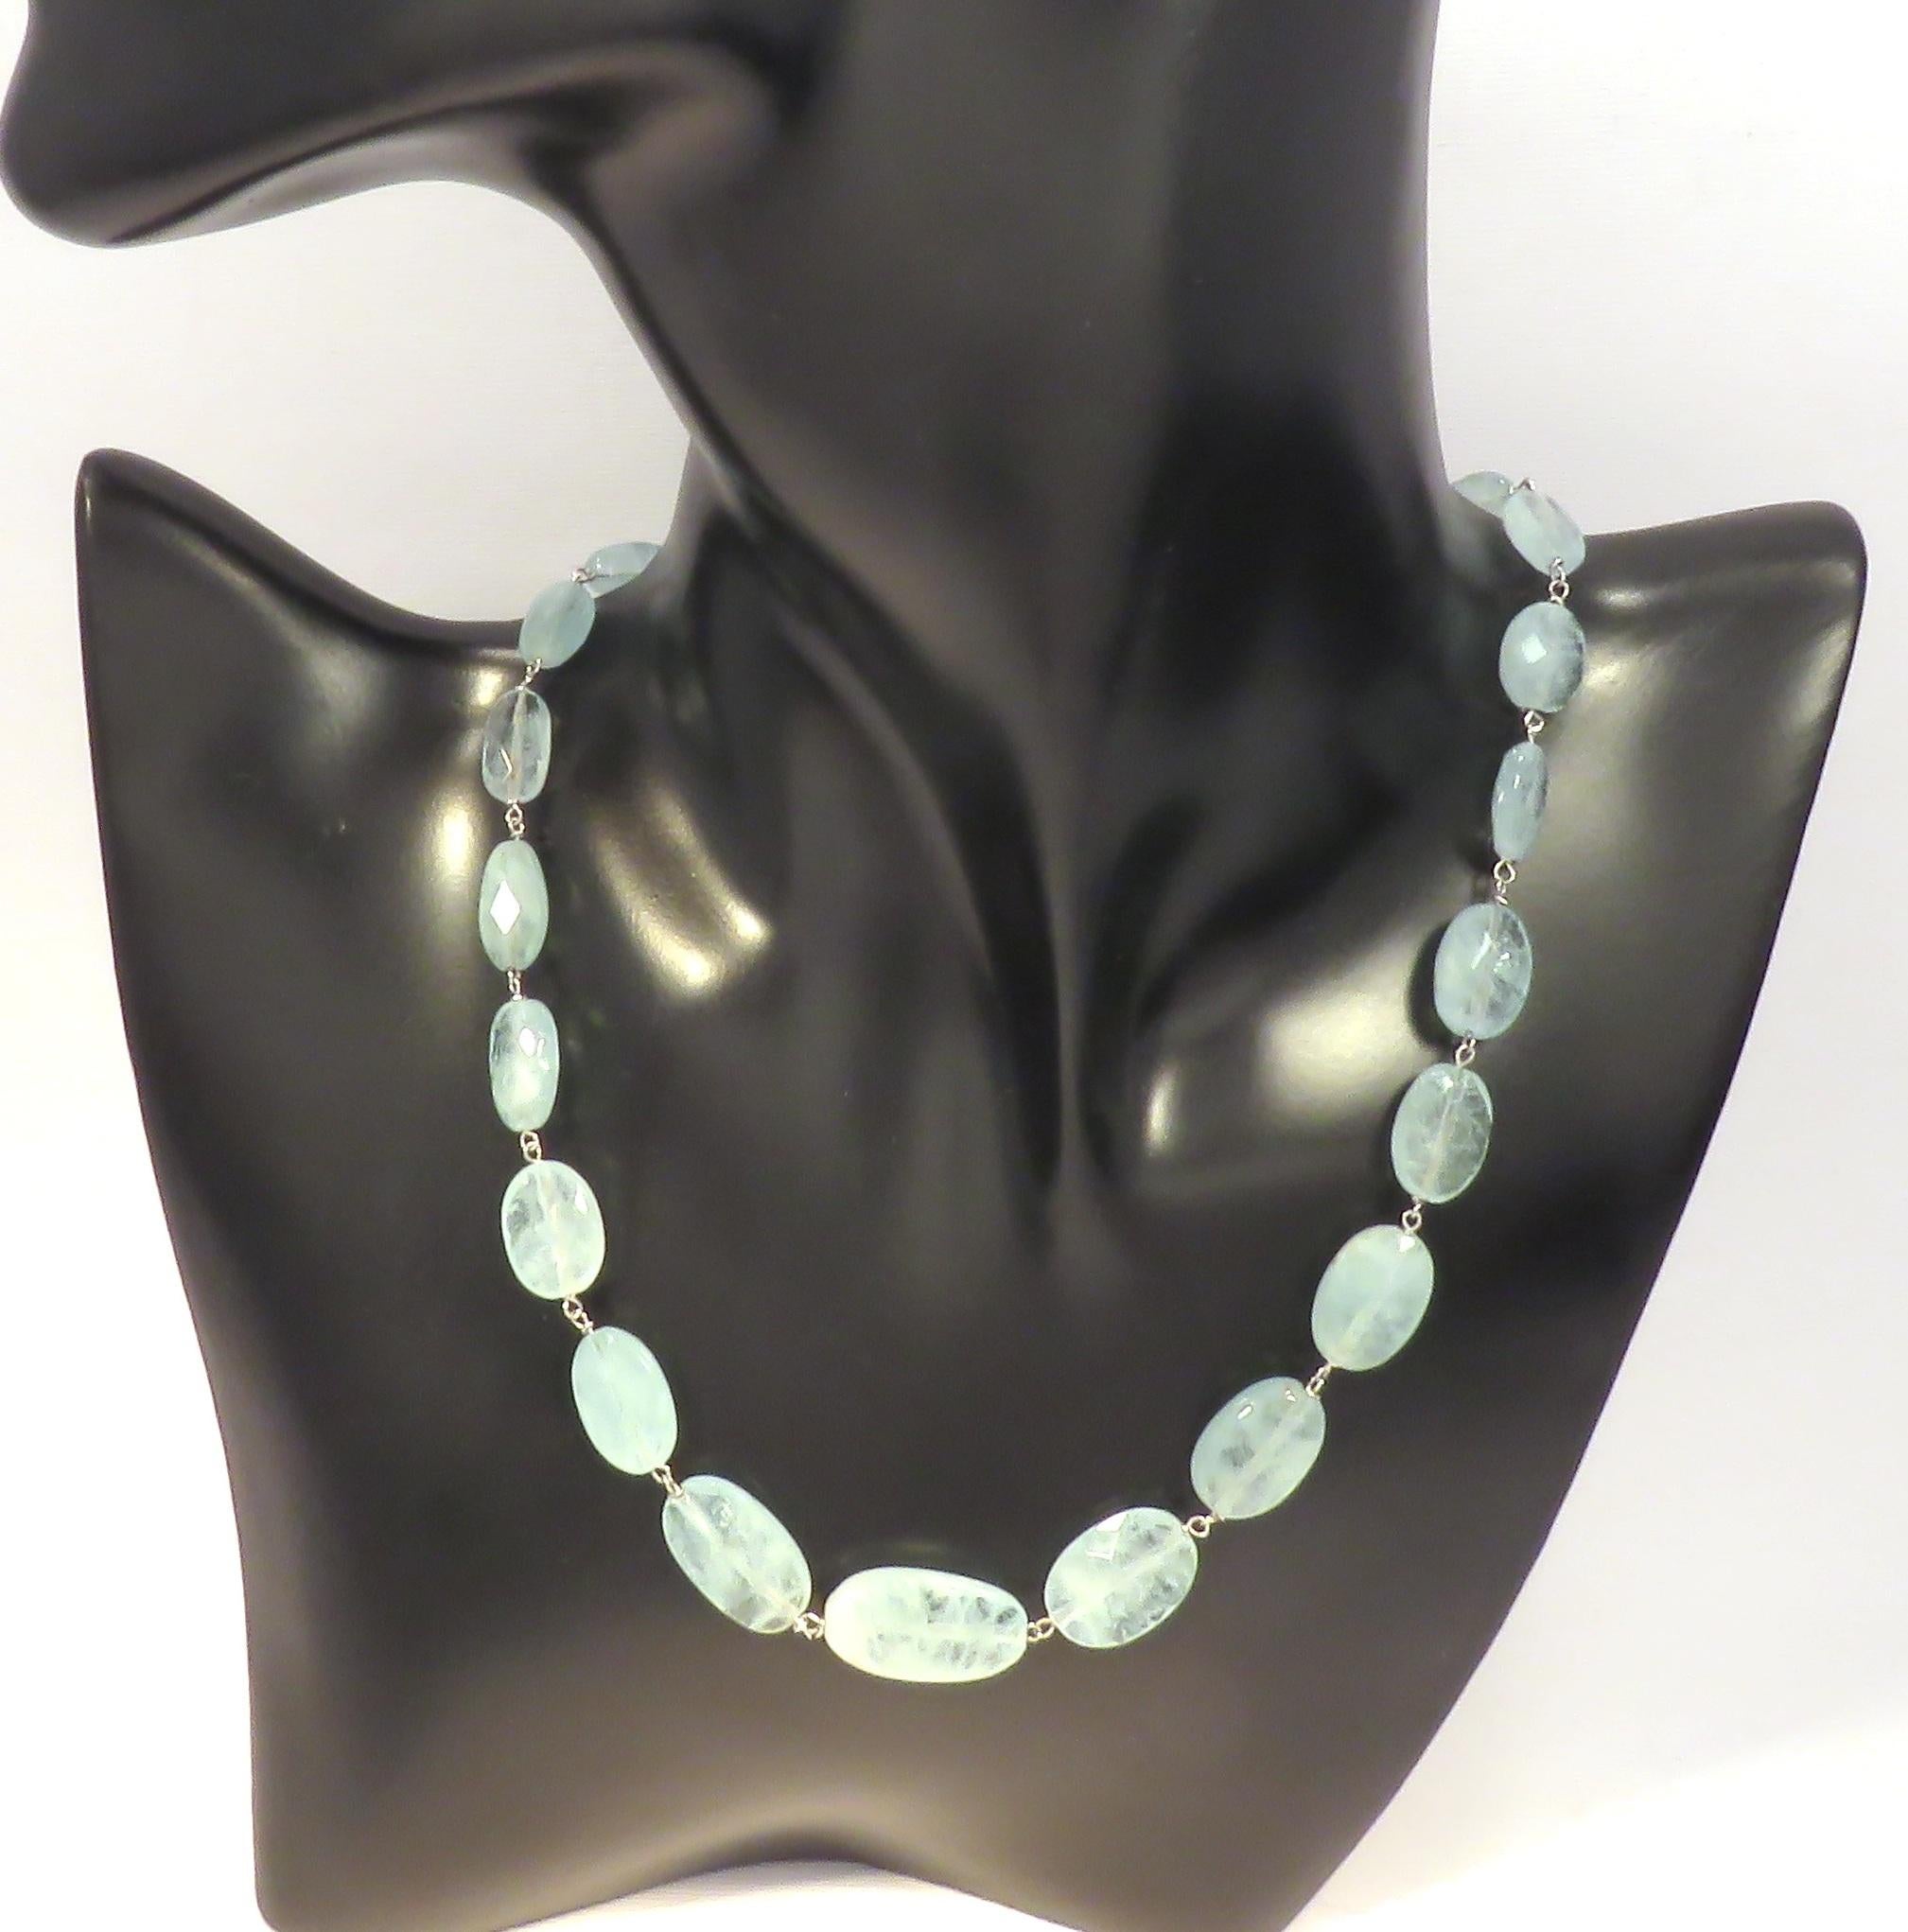 Simple and elegant necklace with genuine dégradé aquamarine gemstones oval briolette cut. The necklace is crafted in 18 karat white gold. The length is 410 mm / 16.141 inches, it is possible to lengthen the necklace on customer's request. Handmade